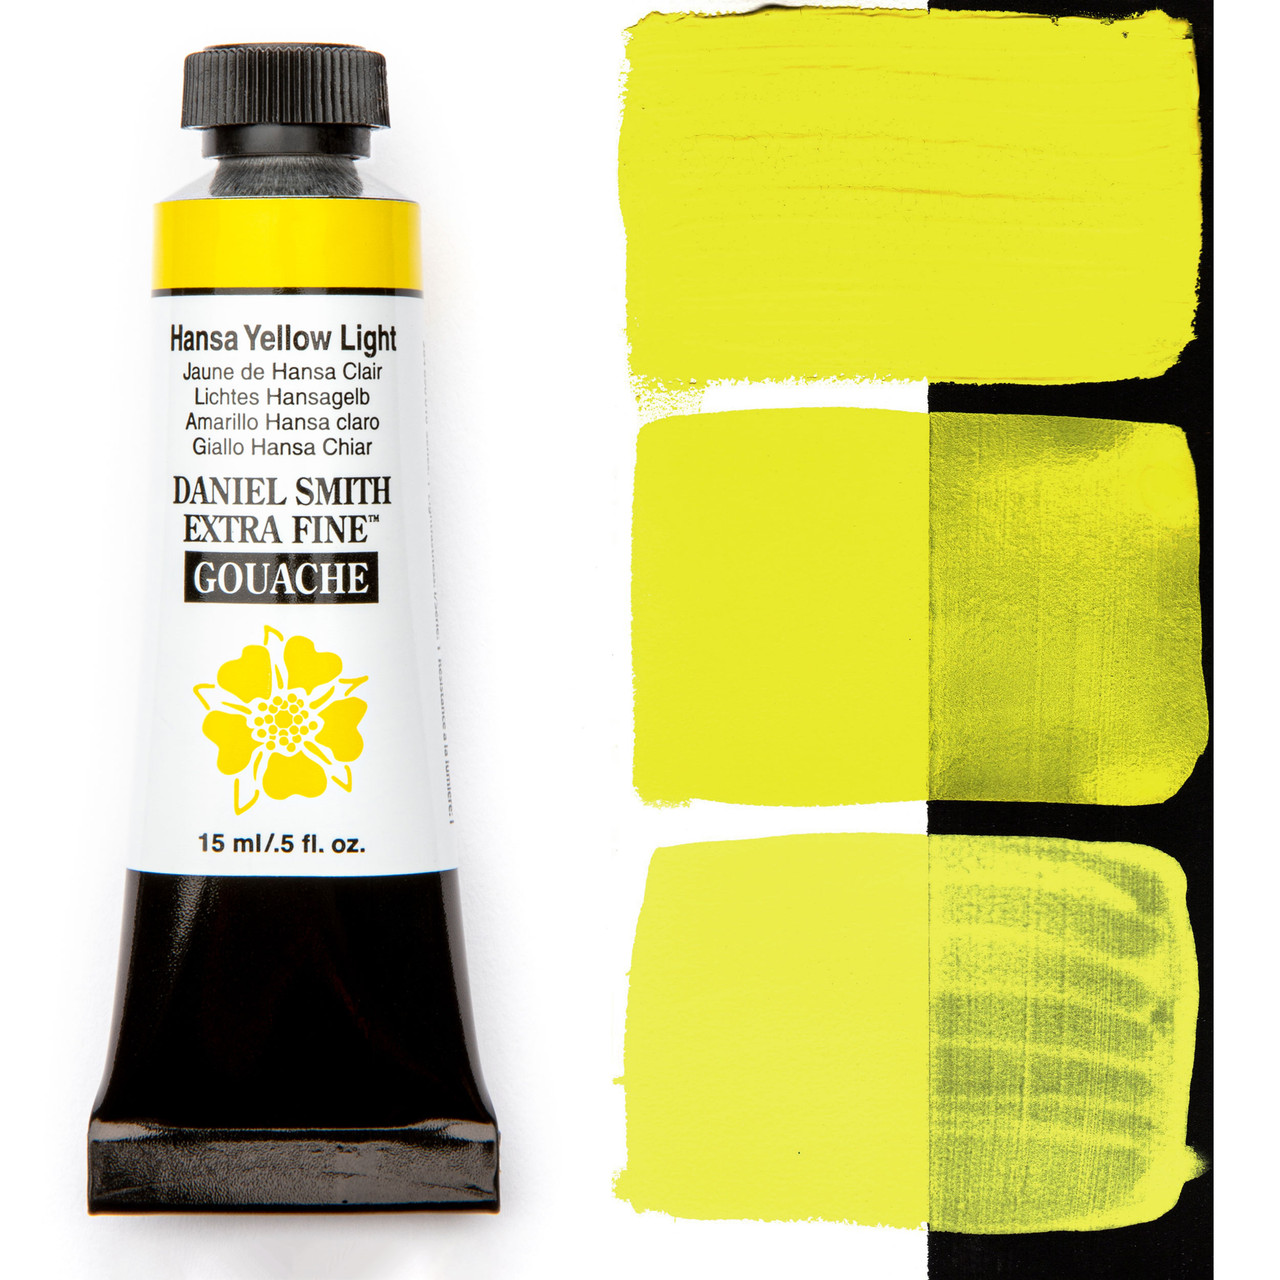 An easy way to get to know your gouache paint is by tinting all